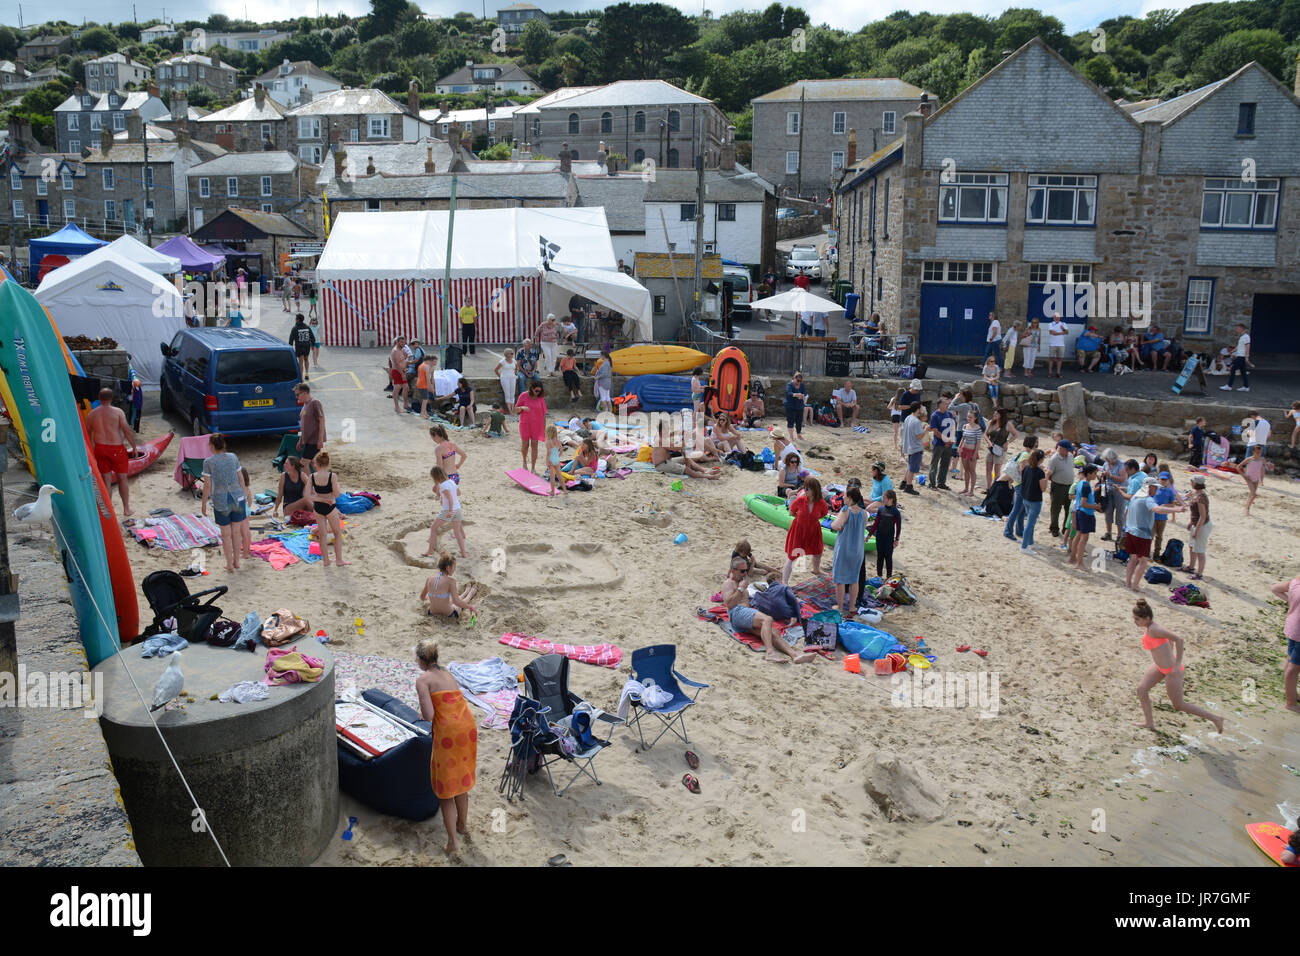 Mousehole, Cornwall, UK. 3rd August 2017. UK Weather. It was a sunny start for the annual Mousehole carnival which runs over the weekend. The afternoon saw a sand sculpture competition on the tiny harbour beach. At high tide locals and holiday makers enjoyed leaping off the harbour walls into the sea - which had a reported temperature of 21 degrees C Credit: cwallpix/Alamy Live News Stock Photo